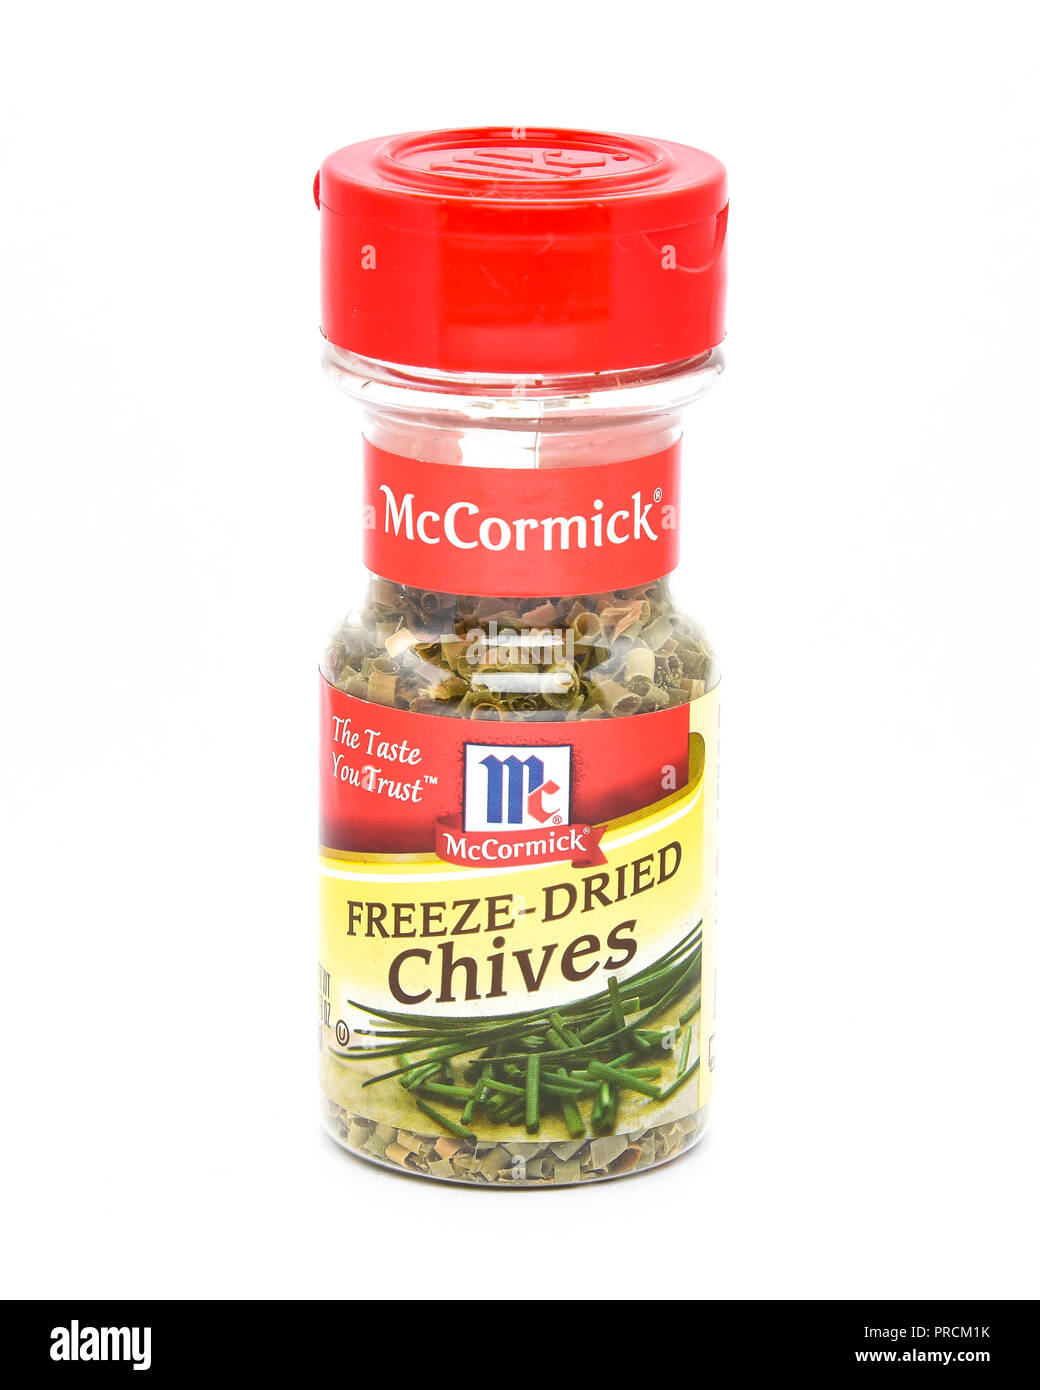 A bottle of McCormick's freeze-dried chives. Stock Photo